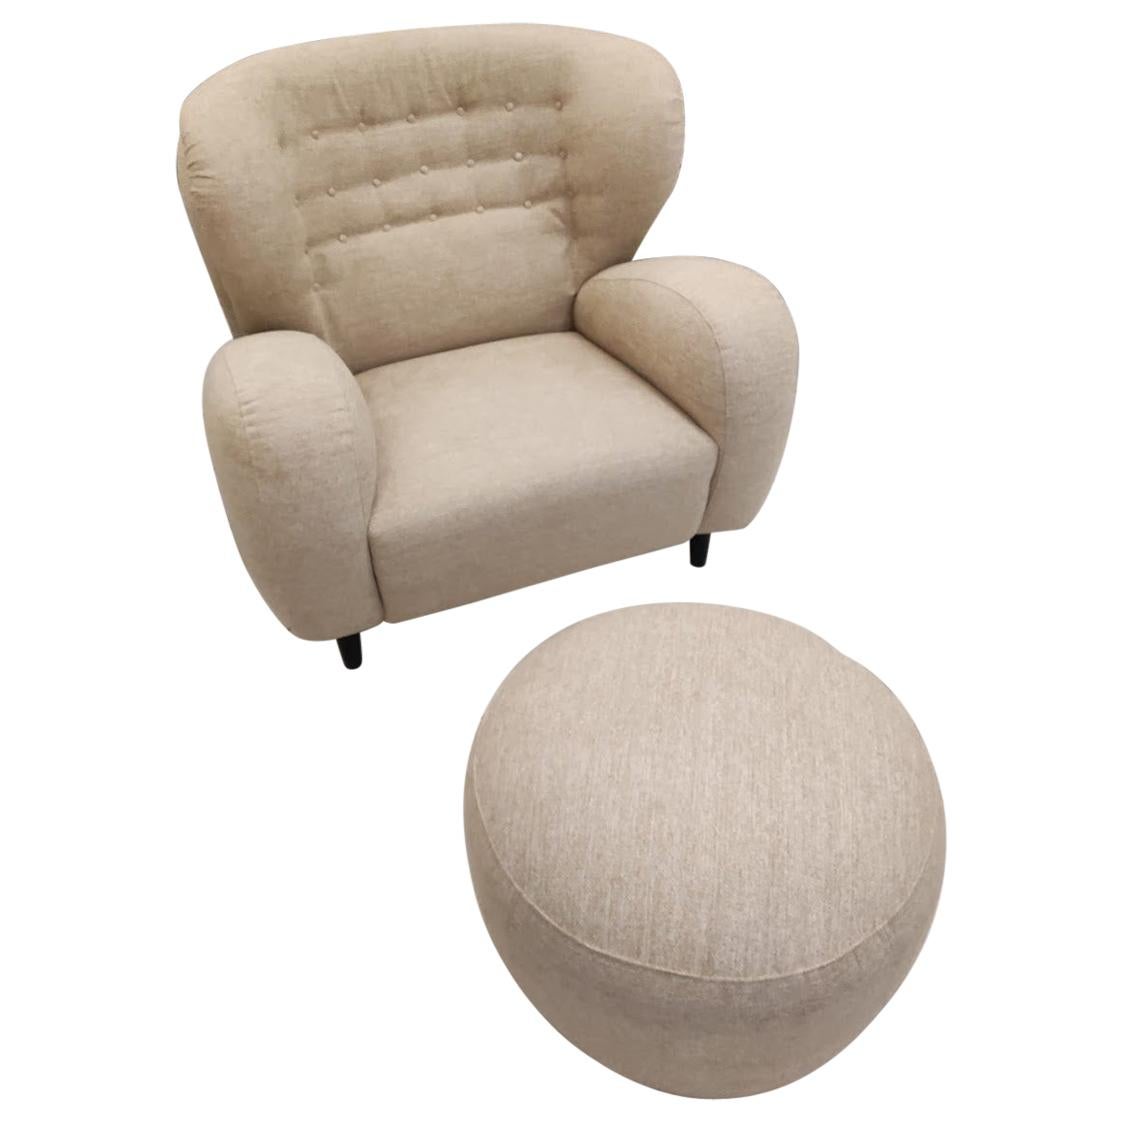 Armchair with Ottoman in Beige Fabric